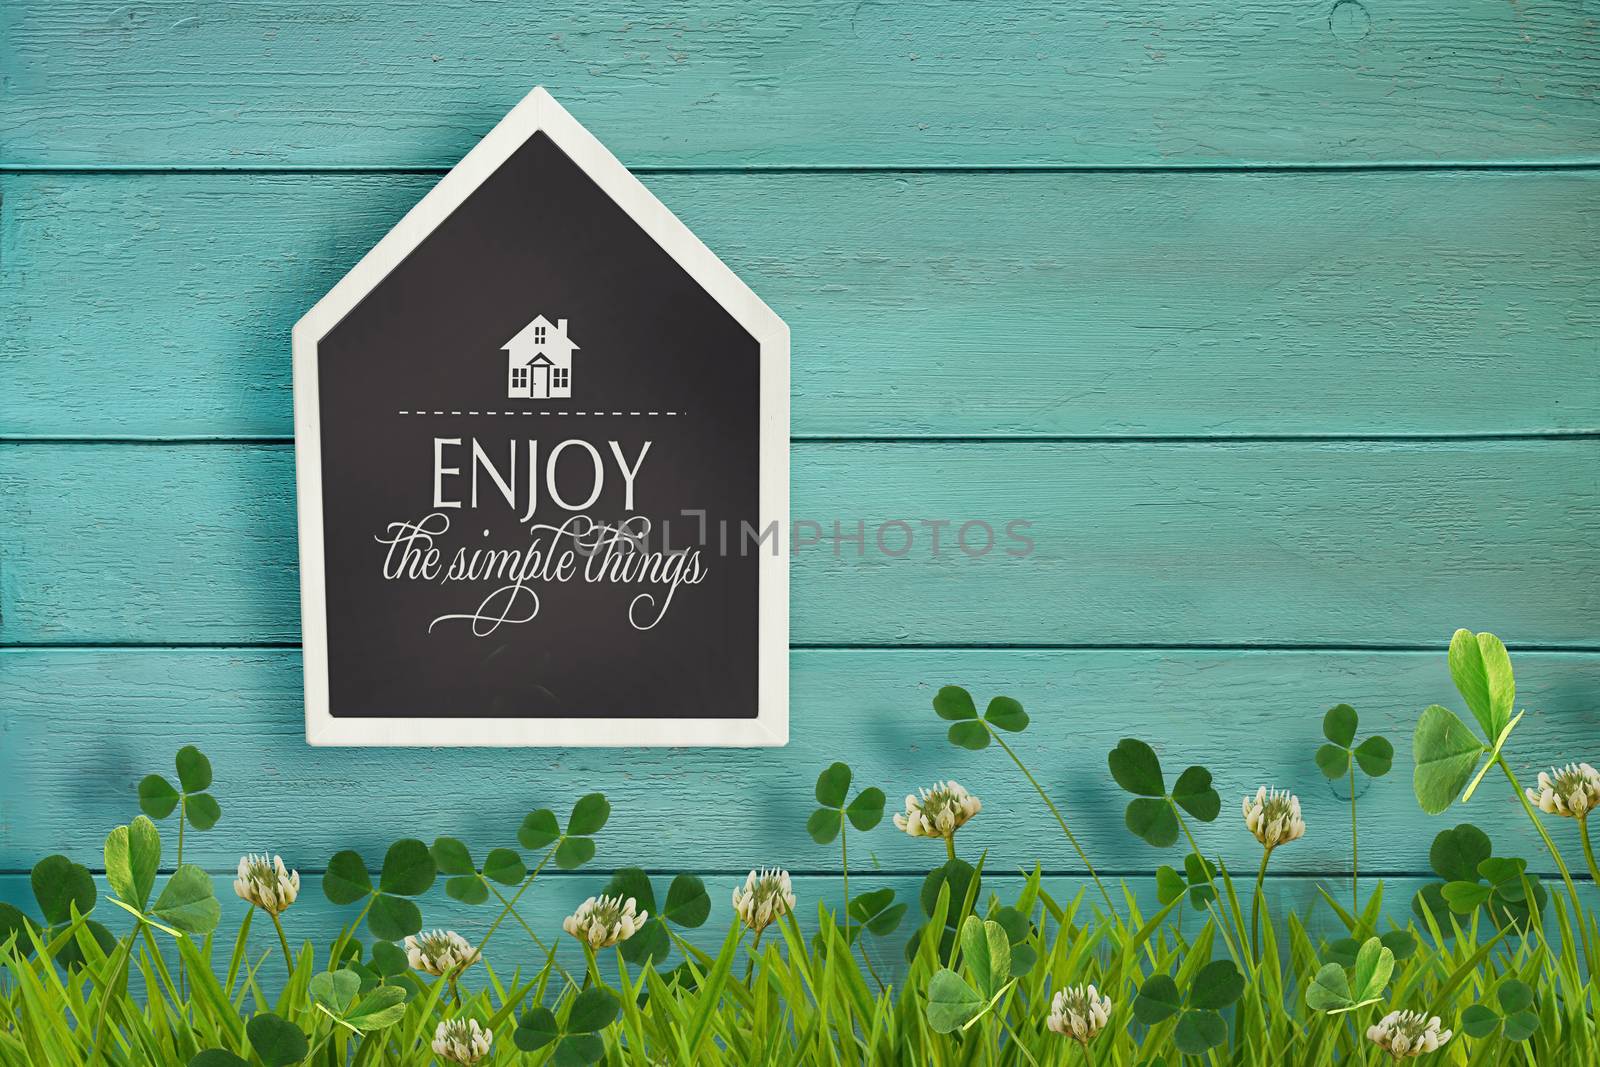 House shaped chalkboard and grass on wood by Sandralise